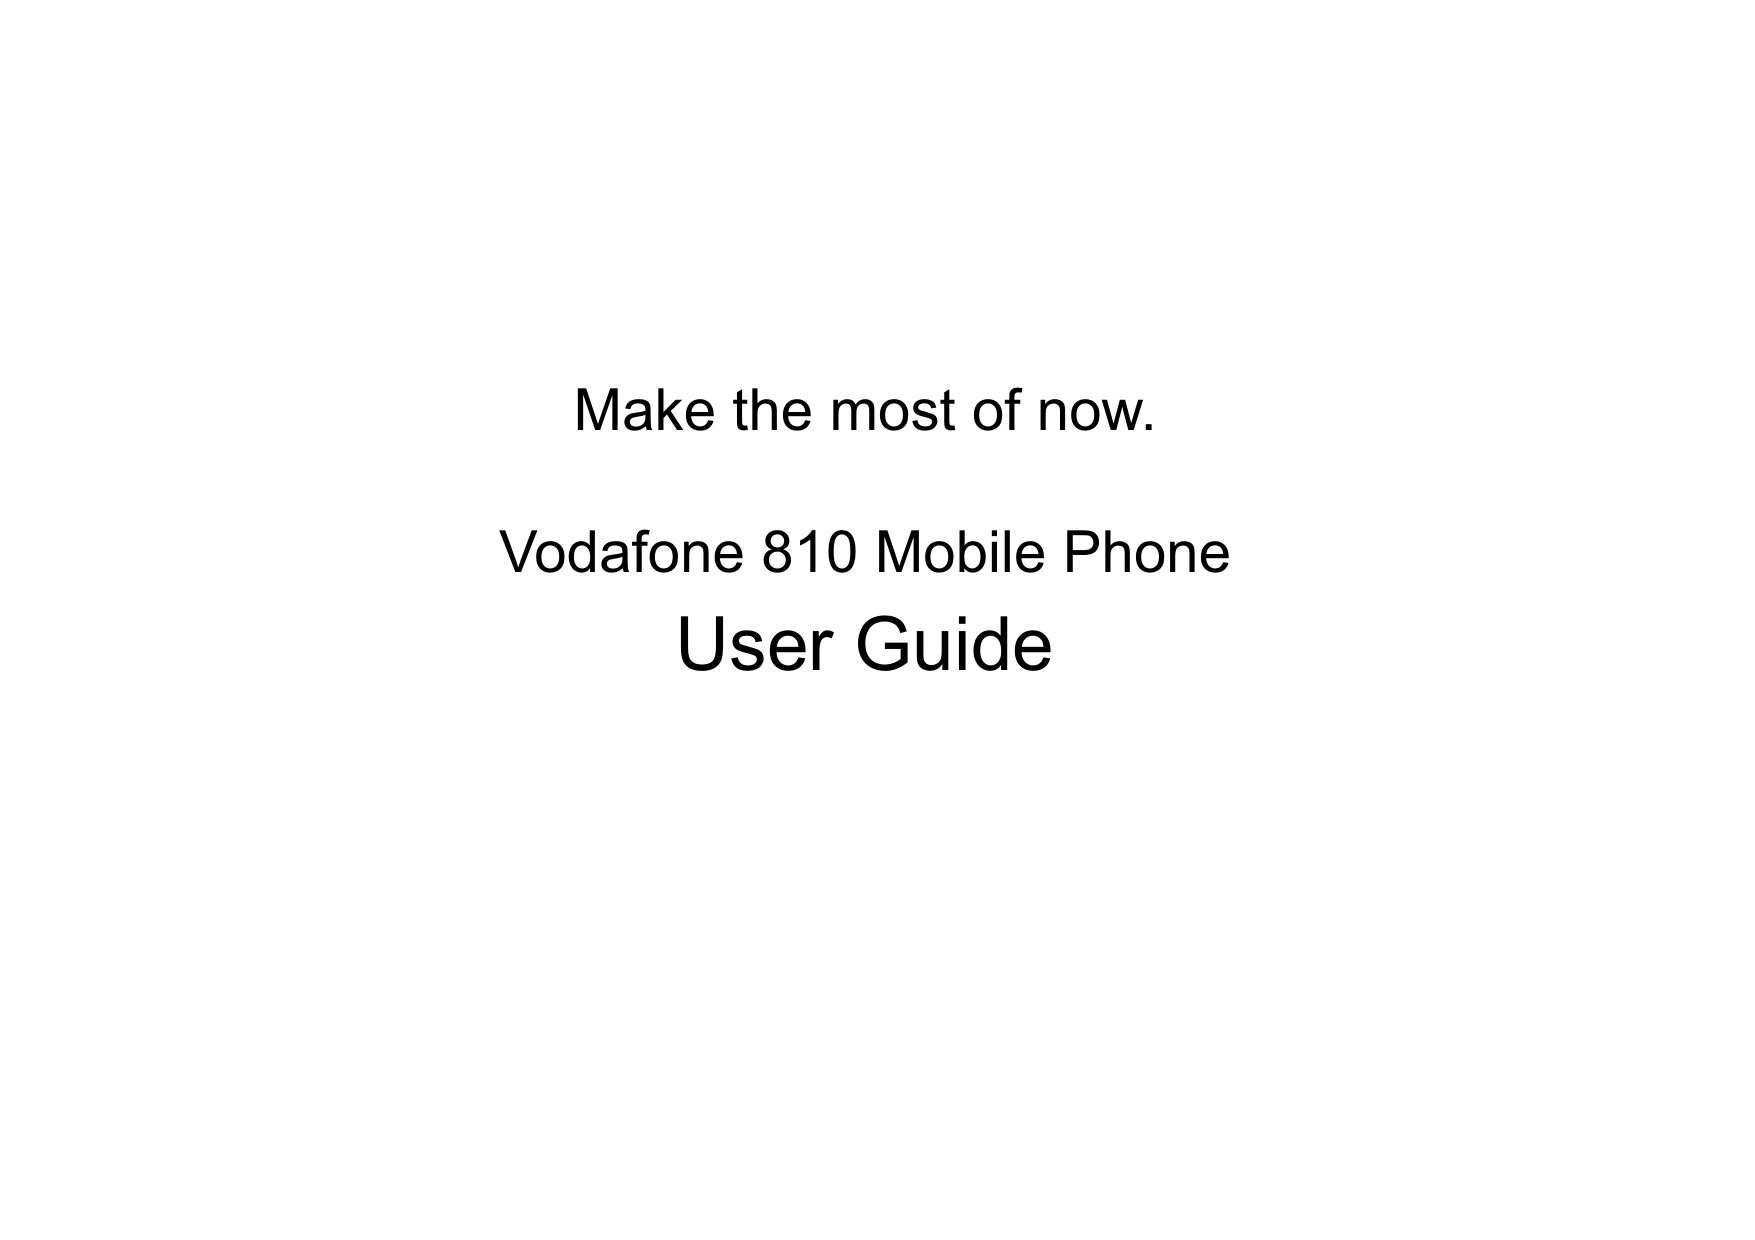 Make the most of now.                                                                                            Vodafone 810 Mobile PhoneUser Guide                                                                                                                                                                                                             